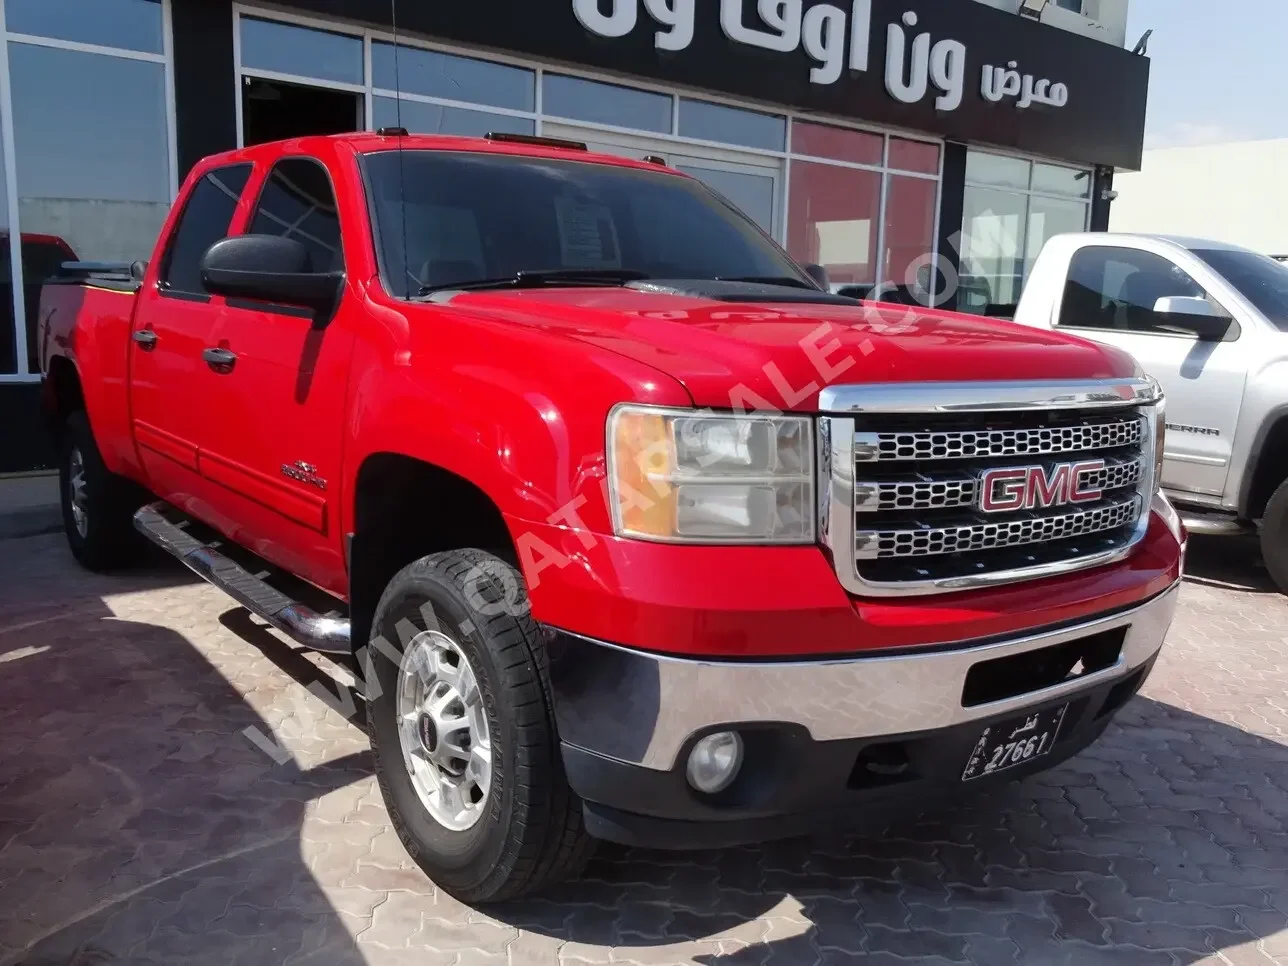 GMC  Sierra  2500 HD  2012  Automatic  195,000 Km  8 Cylinder  Four Wheel Drive (4WD)  Pick Up  Red